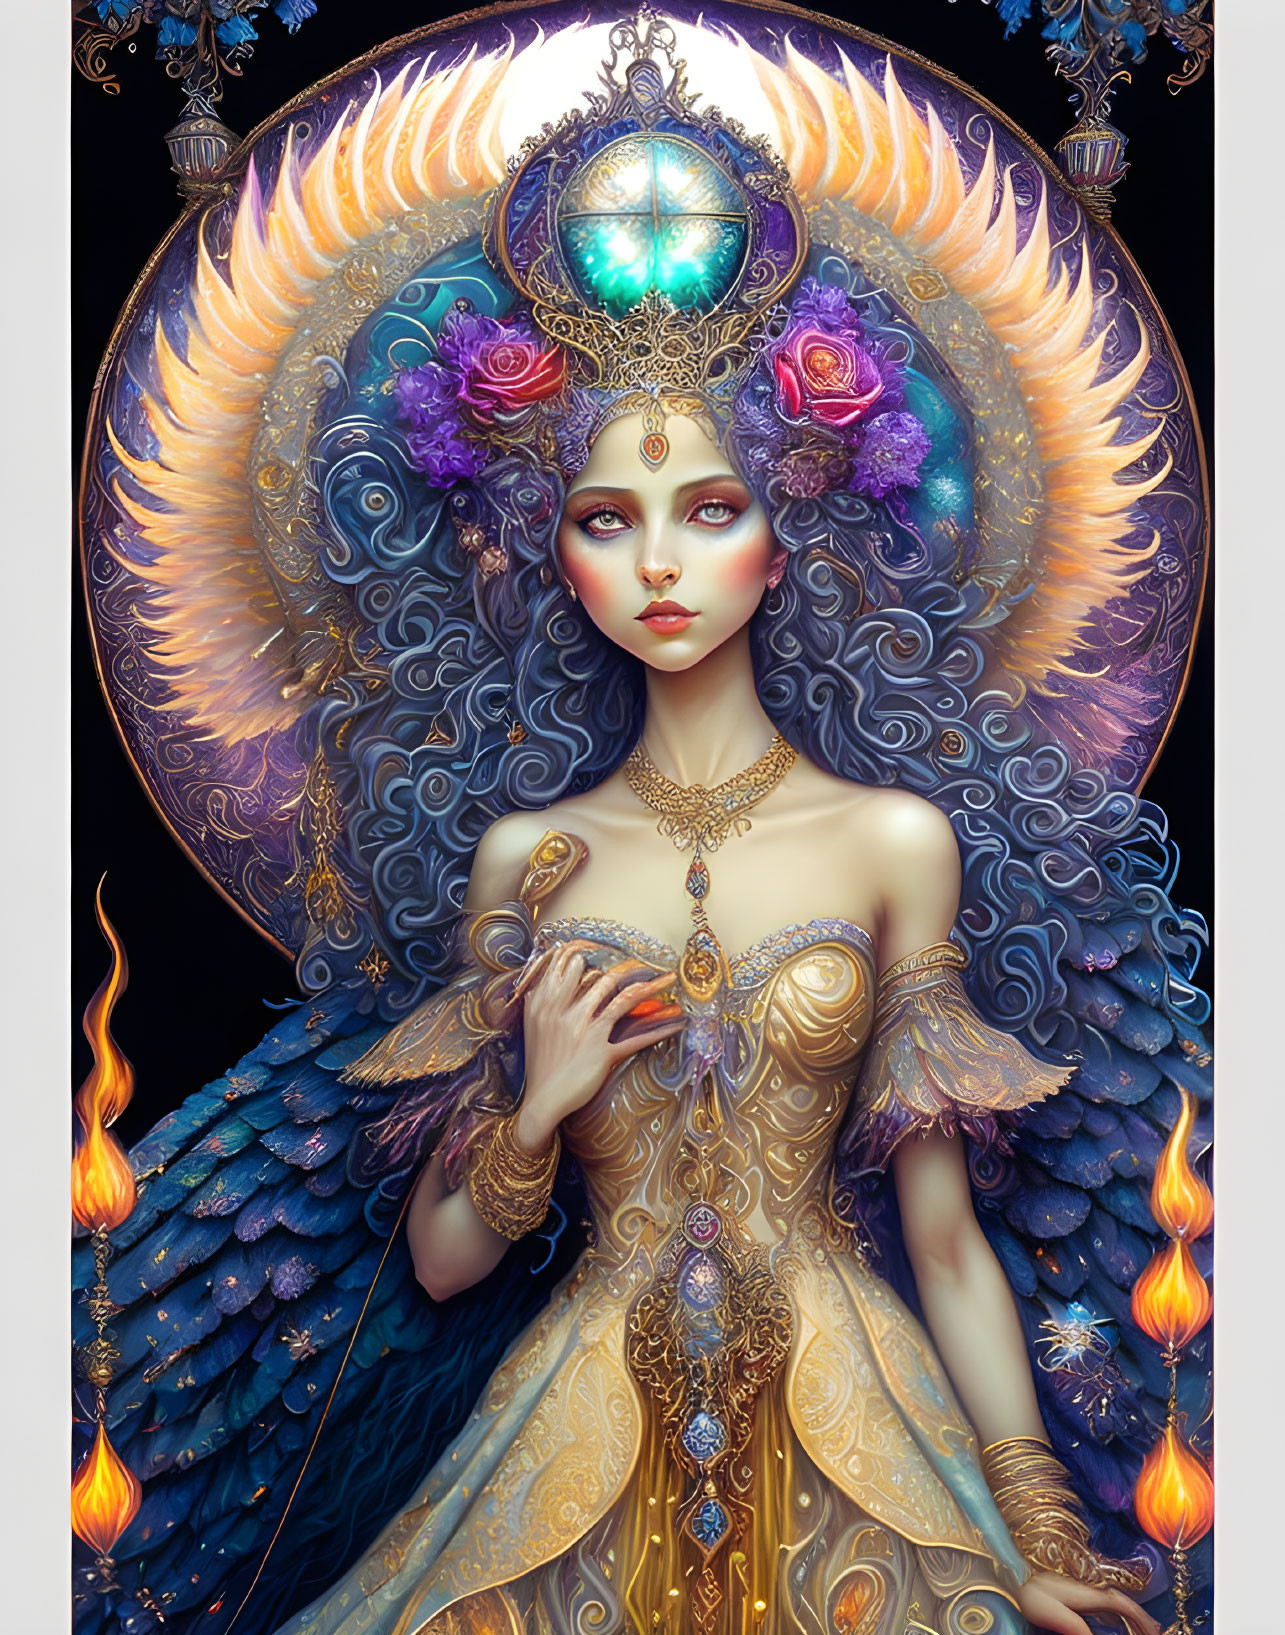 Ethereal woman in golden attire with halo of flowers and orbs against swirling flames